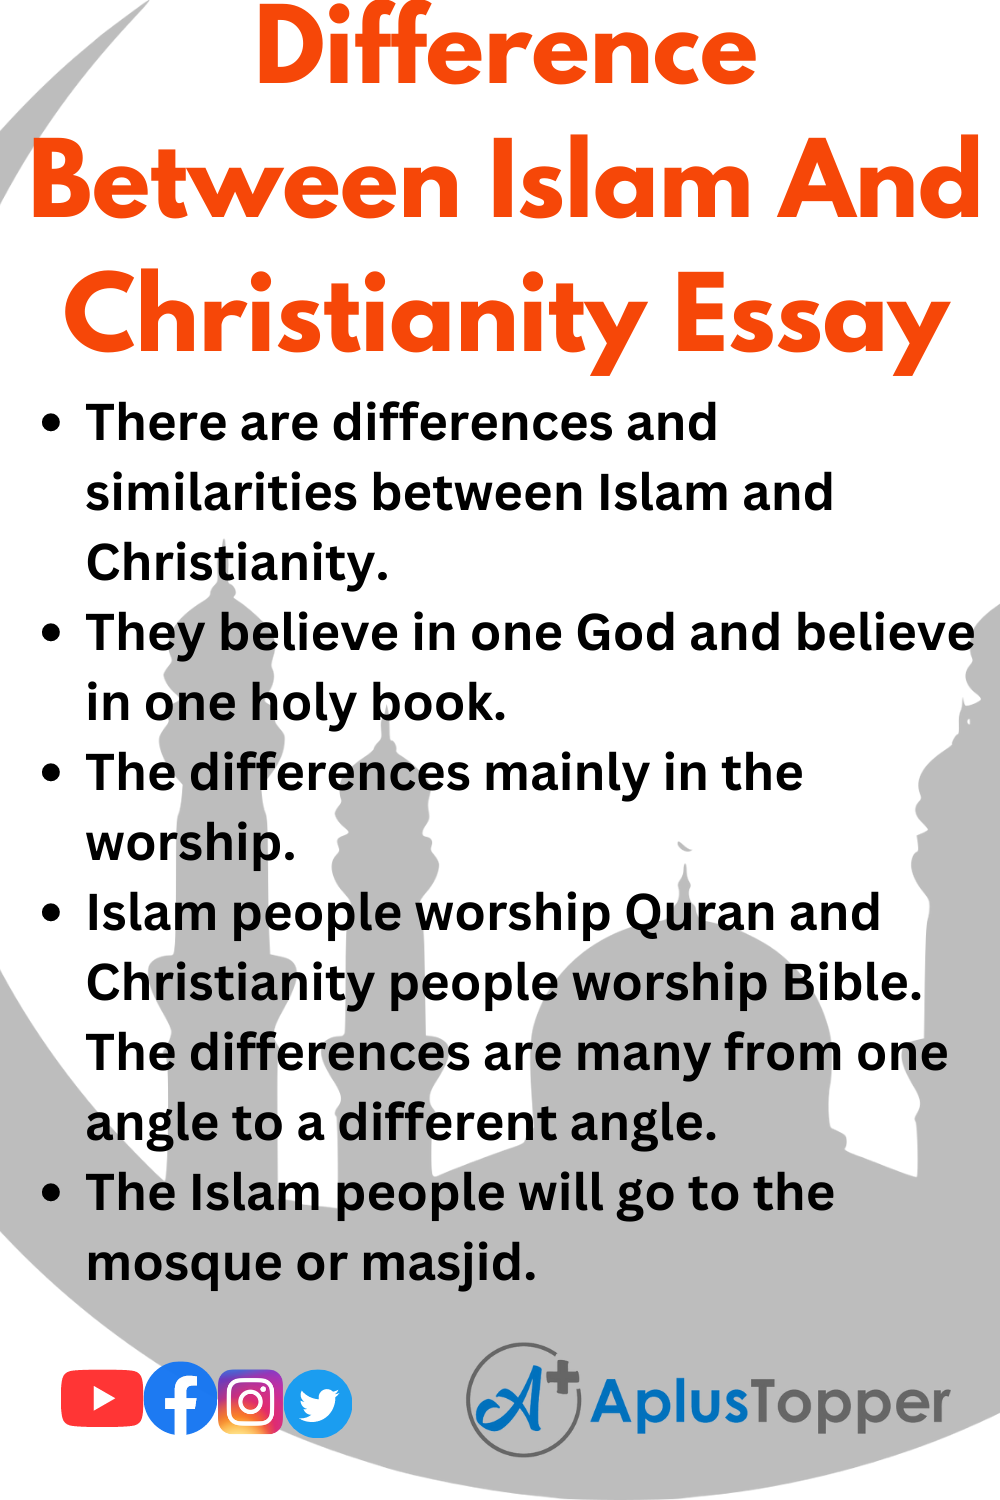 similarities and differences between islam and christianity essay